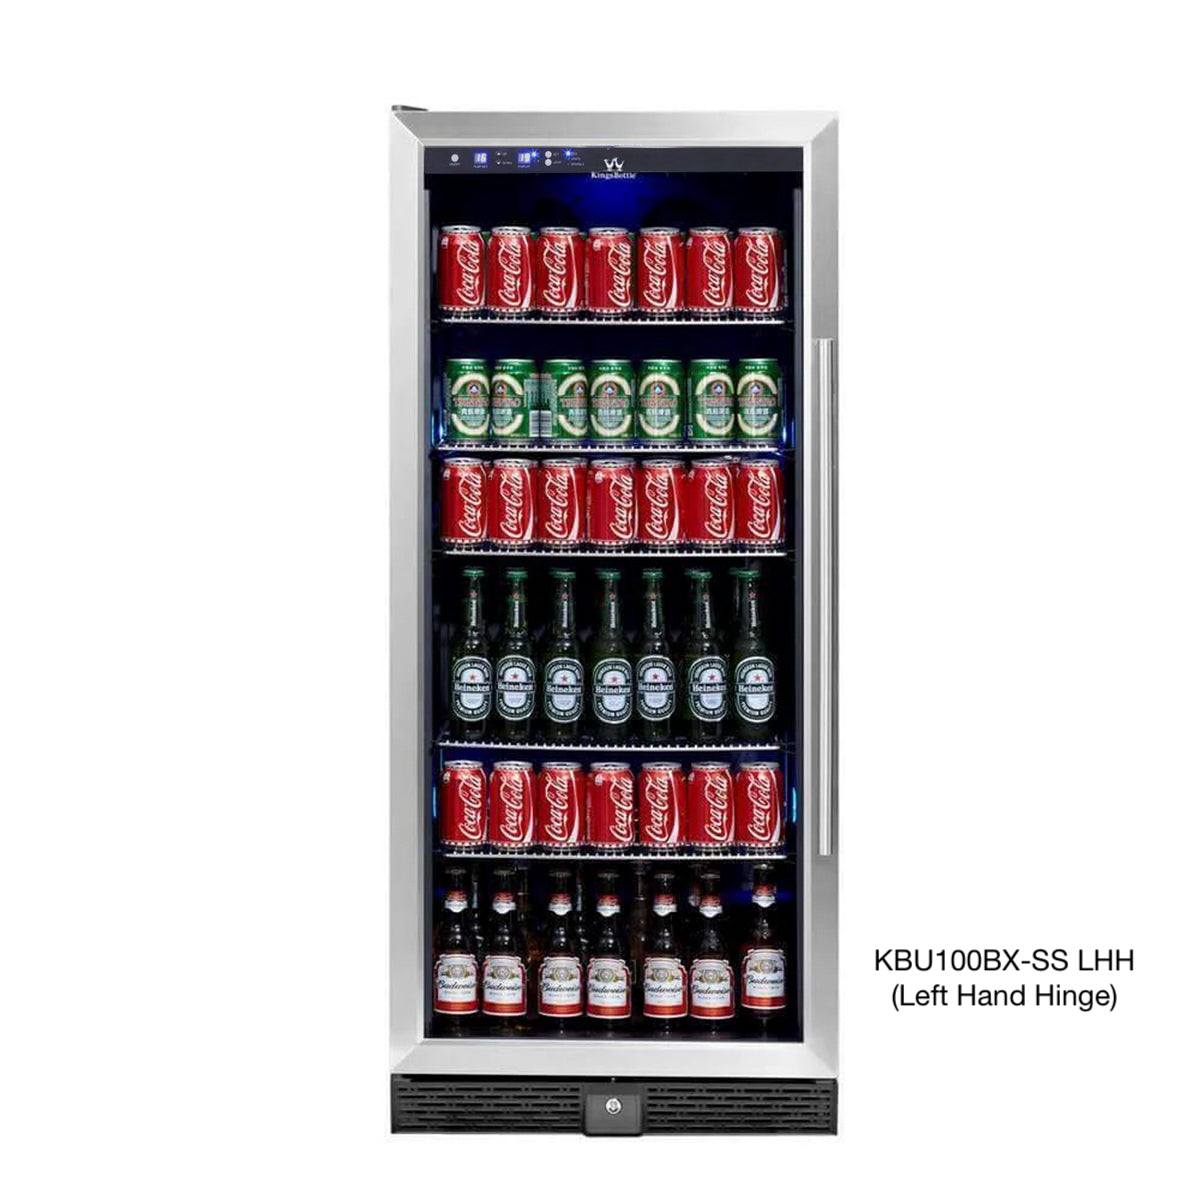 A Kings Bottle 56" Tall Single Zone Beverage Fridge Center with a glass door filled with 484 cans and bottles.